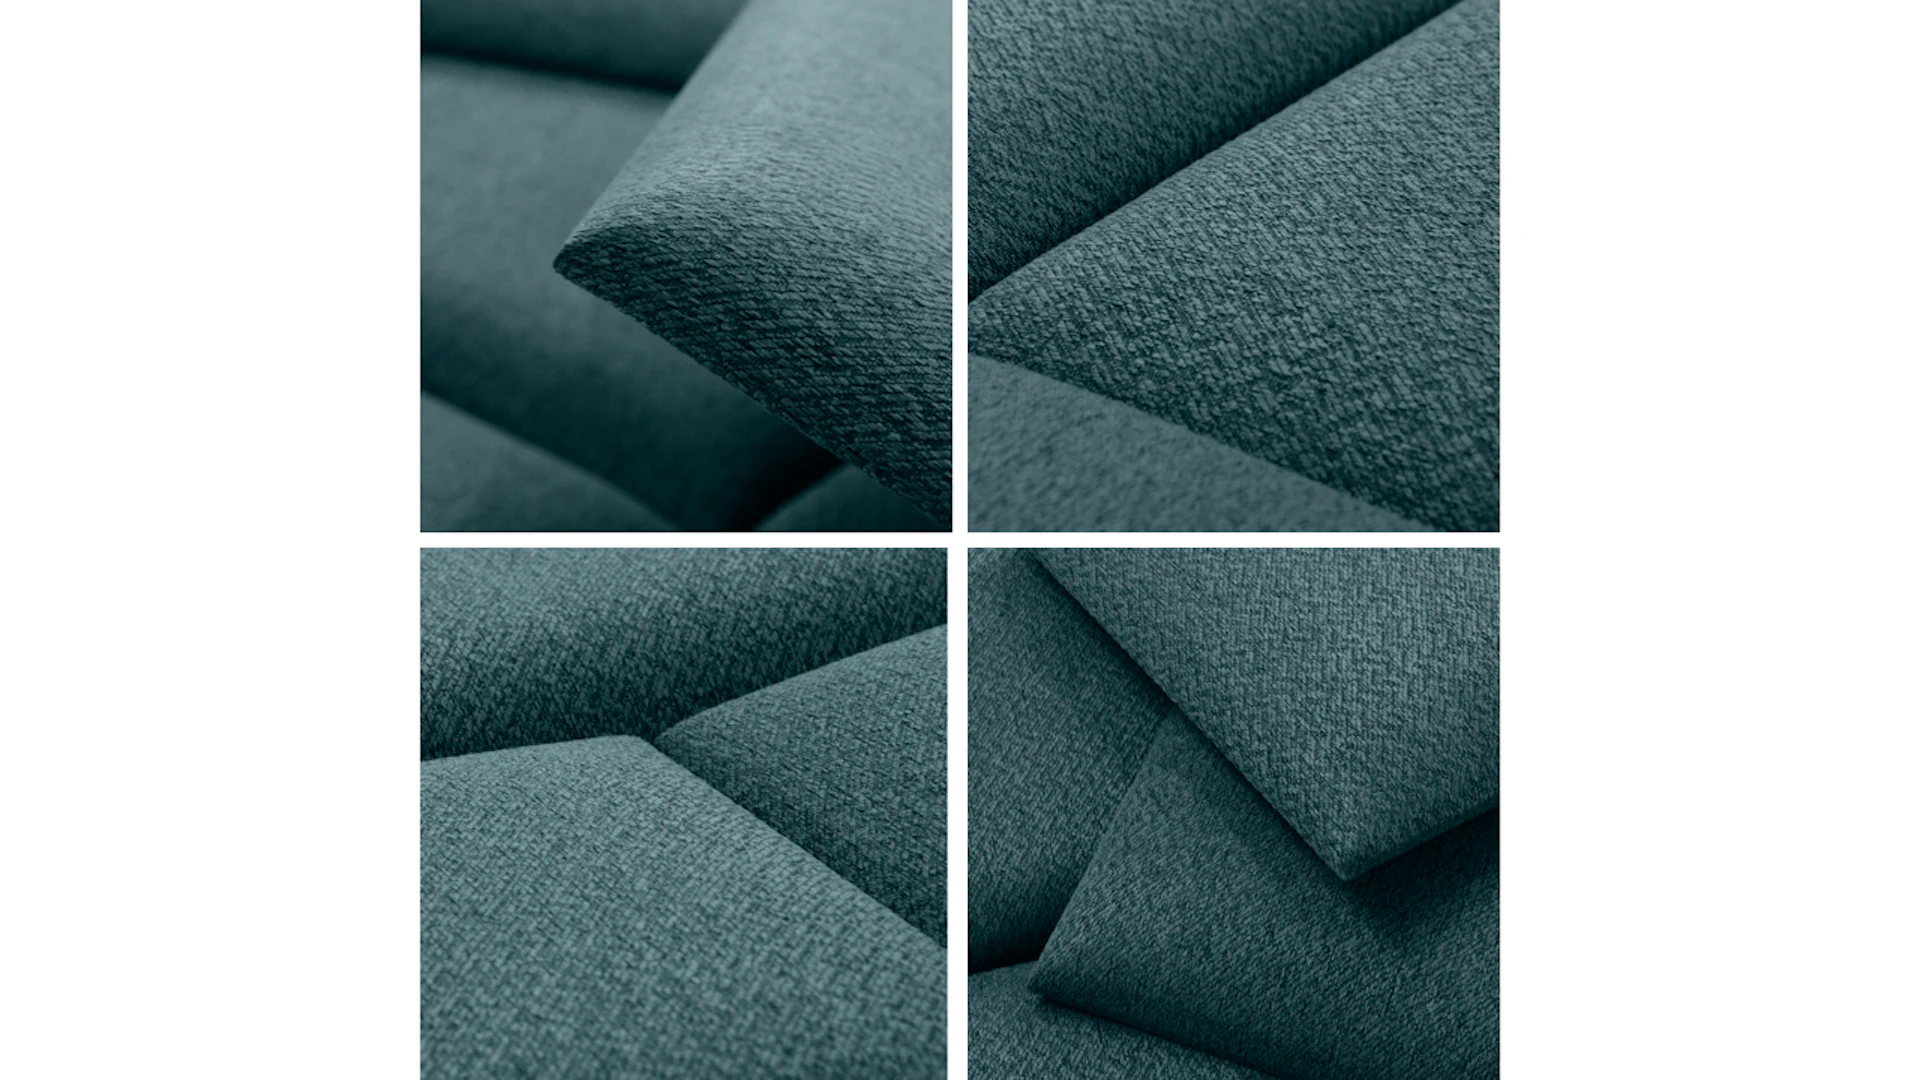 planeo ComfortWall - Acoustic wall cushion 30x30cm water blue